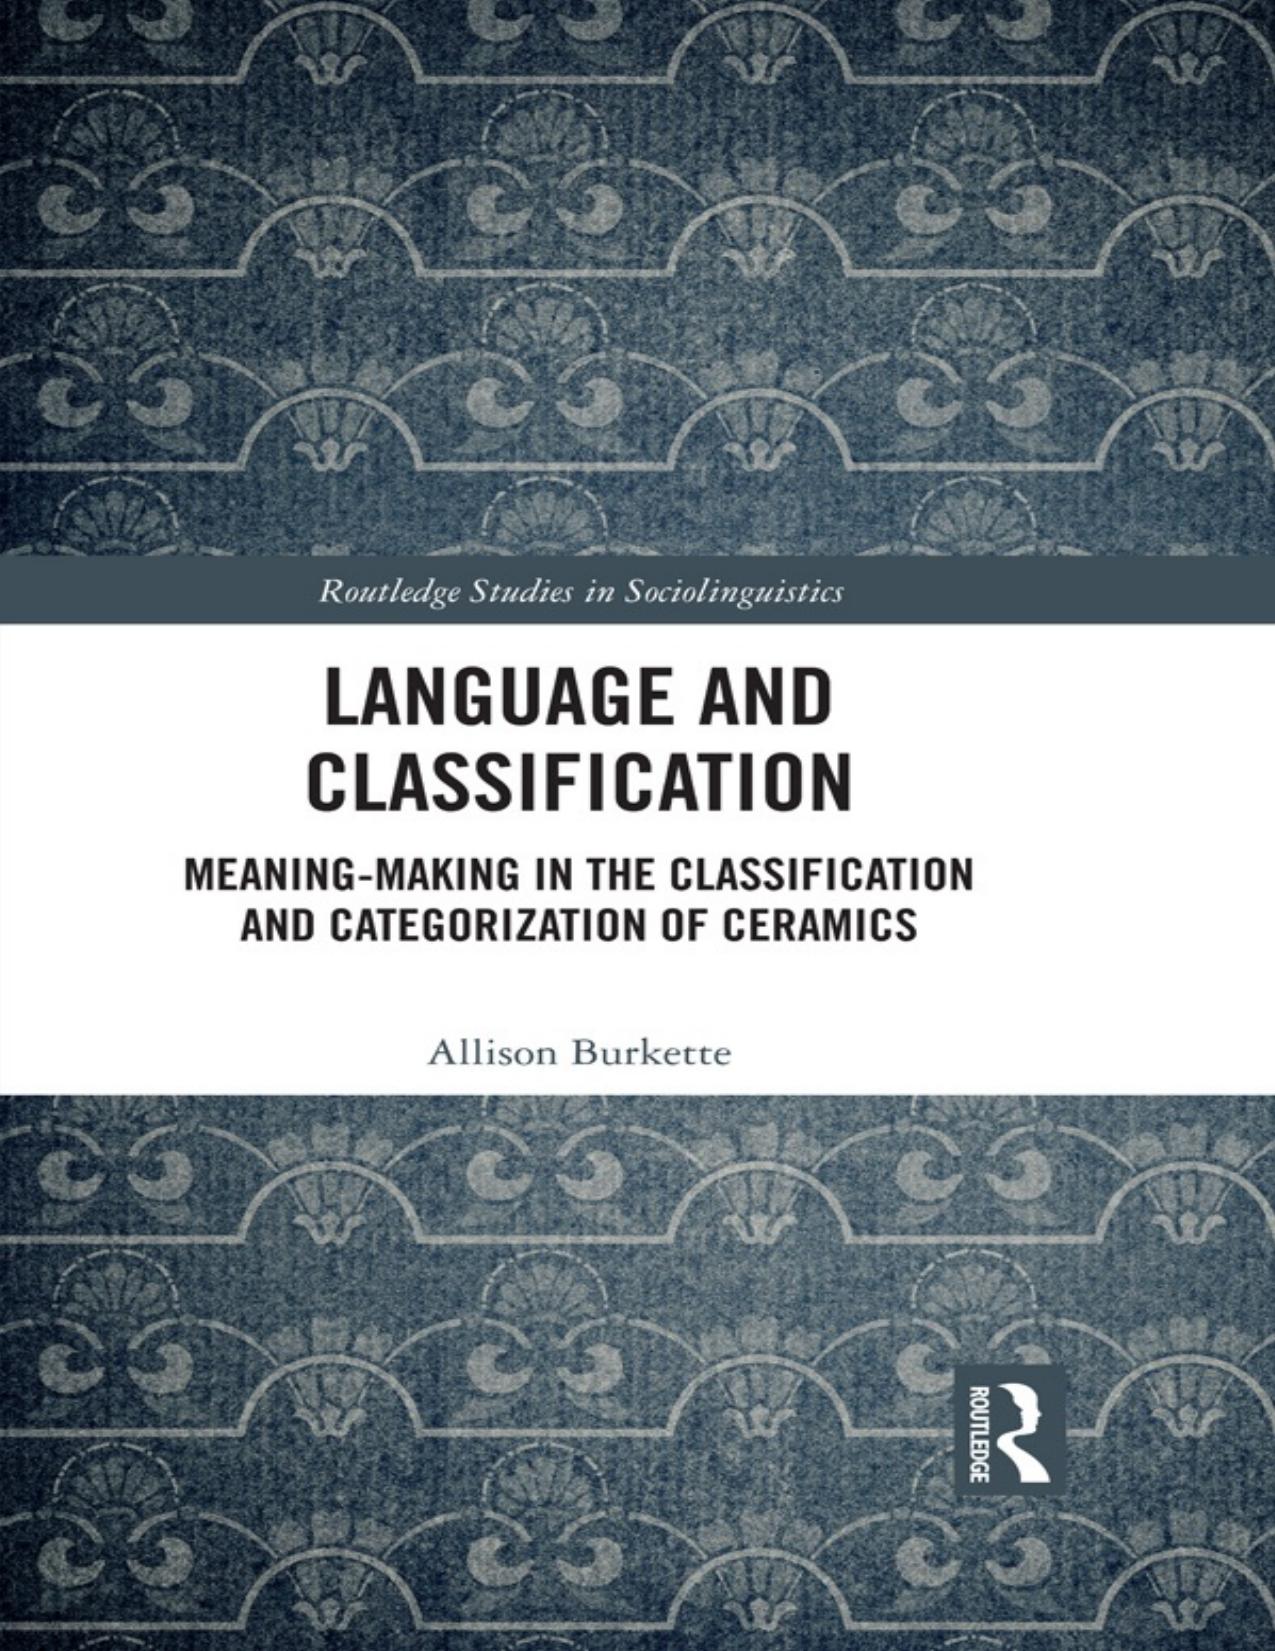 Language and classification : meaning-making in the classification and categorization of ceramics - PDFDrive.com